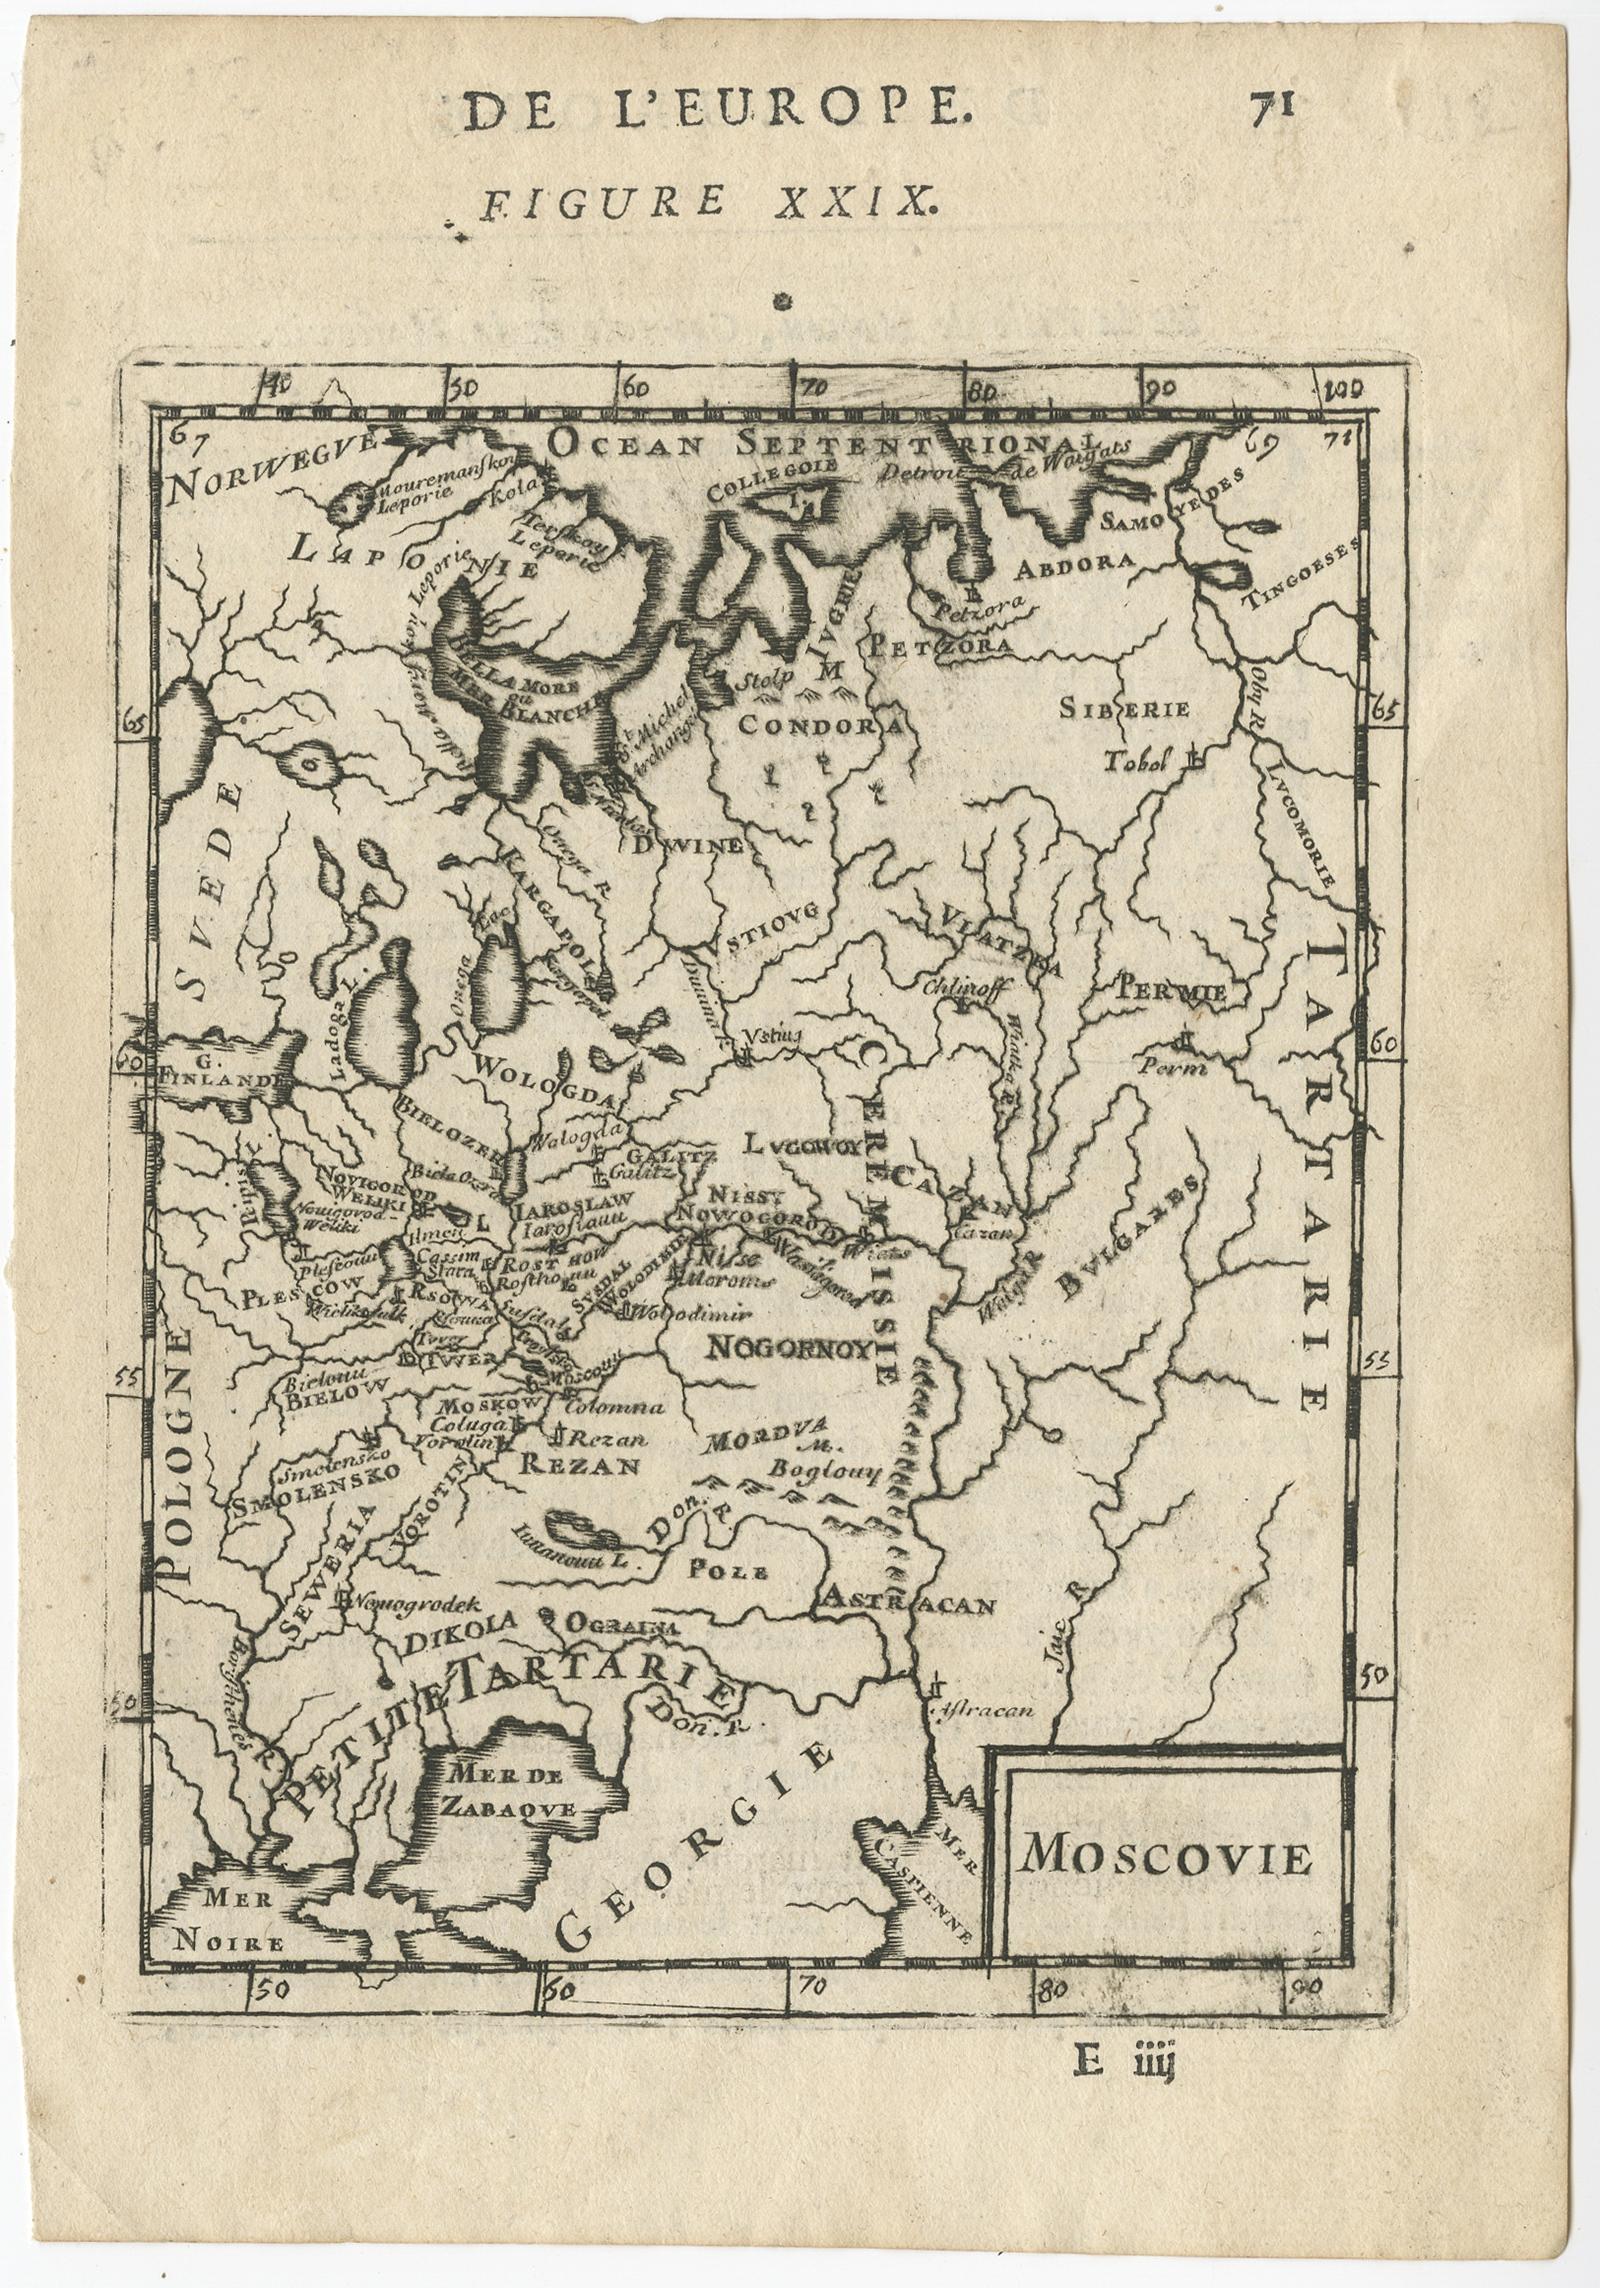 Antique map of modern day Ukraine and Russia titled ‚Moscovie‘. Miniature map of the Moscovia region by A.M. Mallet.

Artists and Engravers: Alain Manneson Mallet (1630-1706) spent the first part of his career as a foot soldier in one the